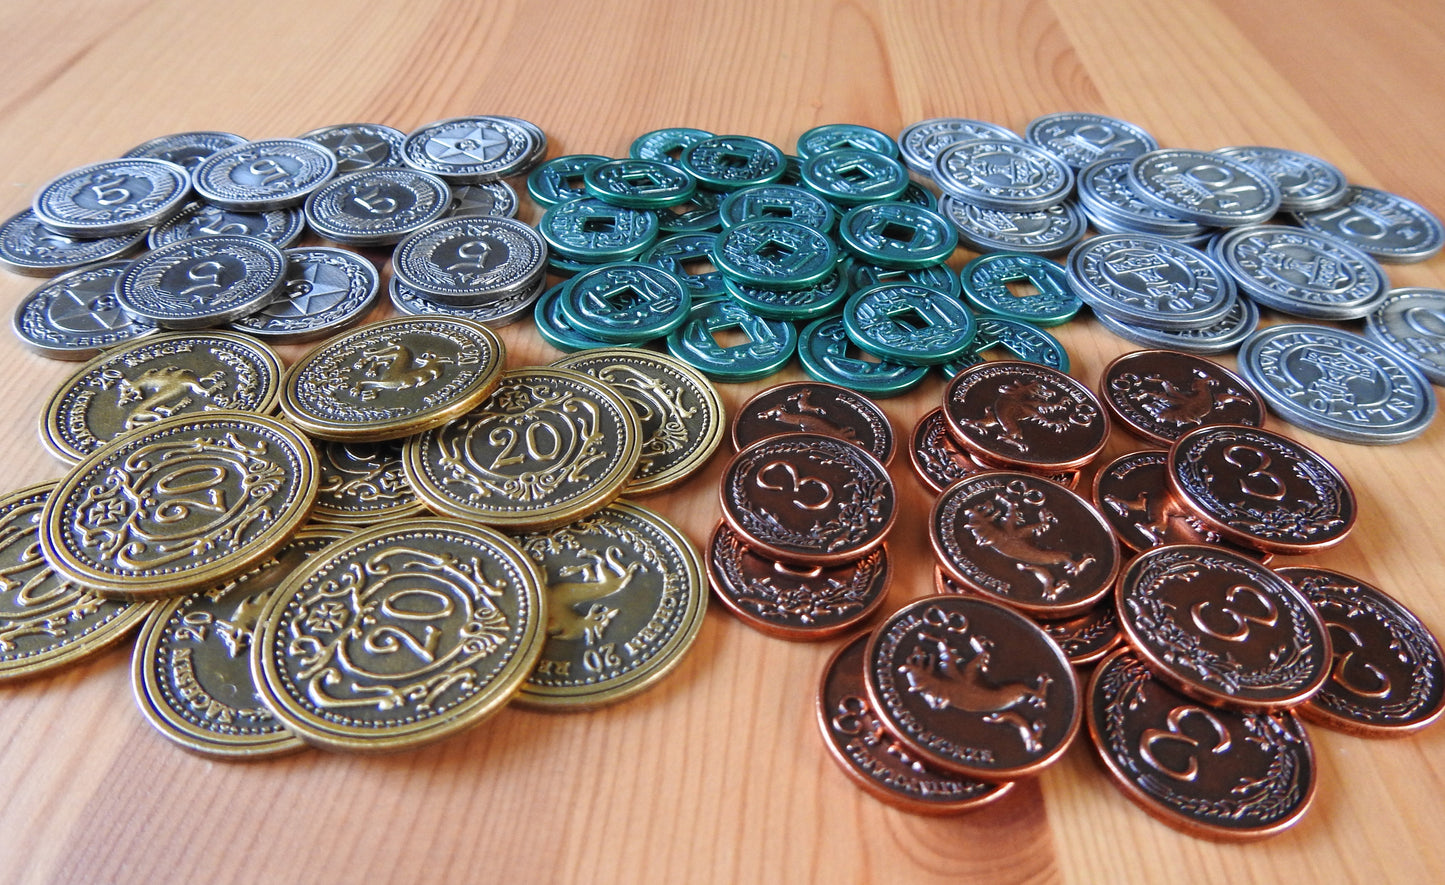 View of the 80 metal coins for the Scythe base game that are included in this accessory.